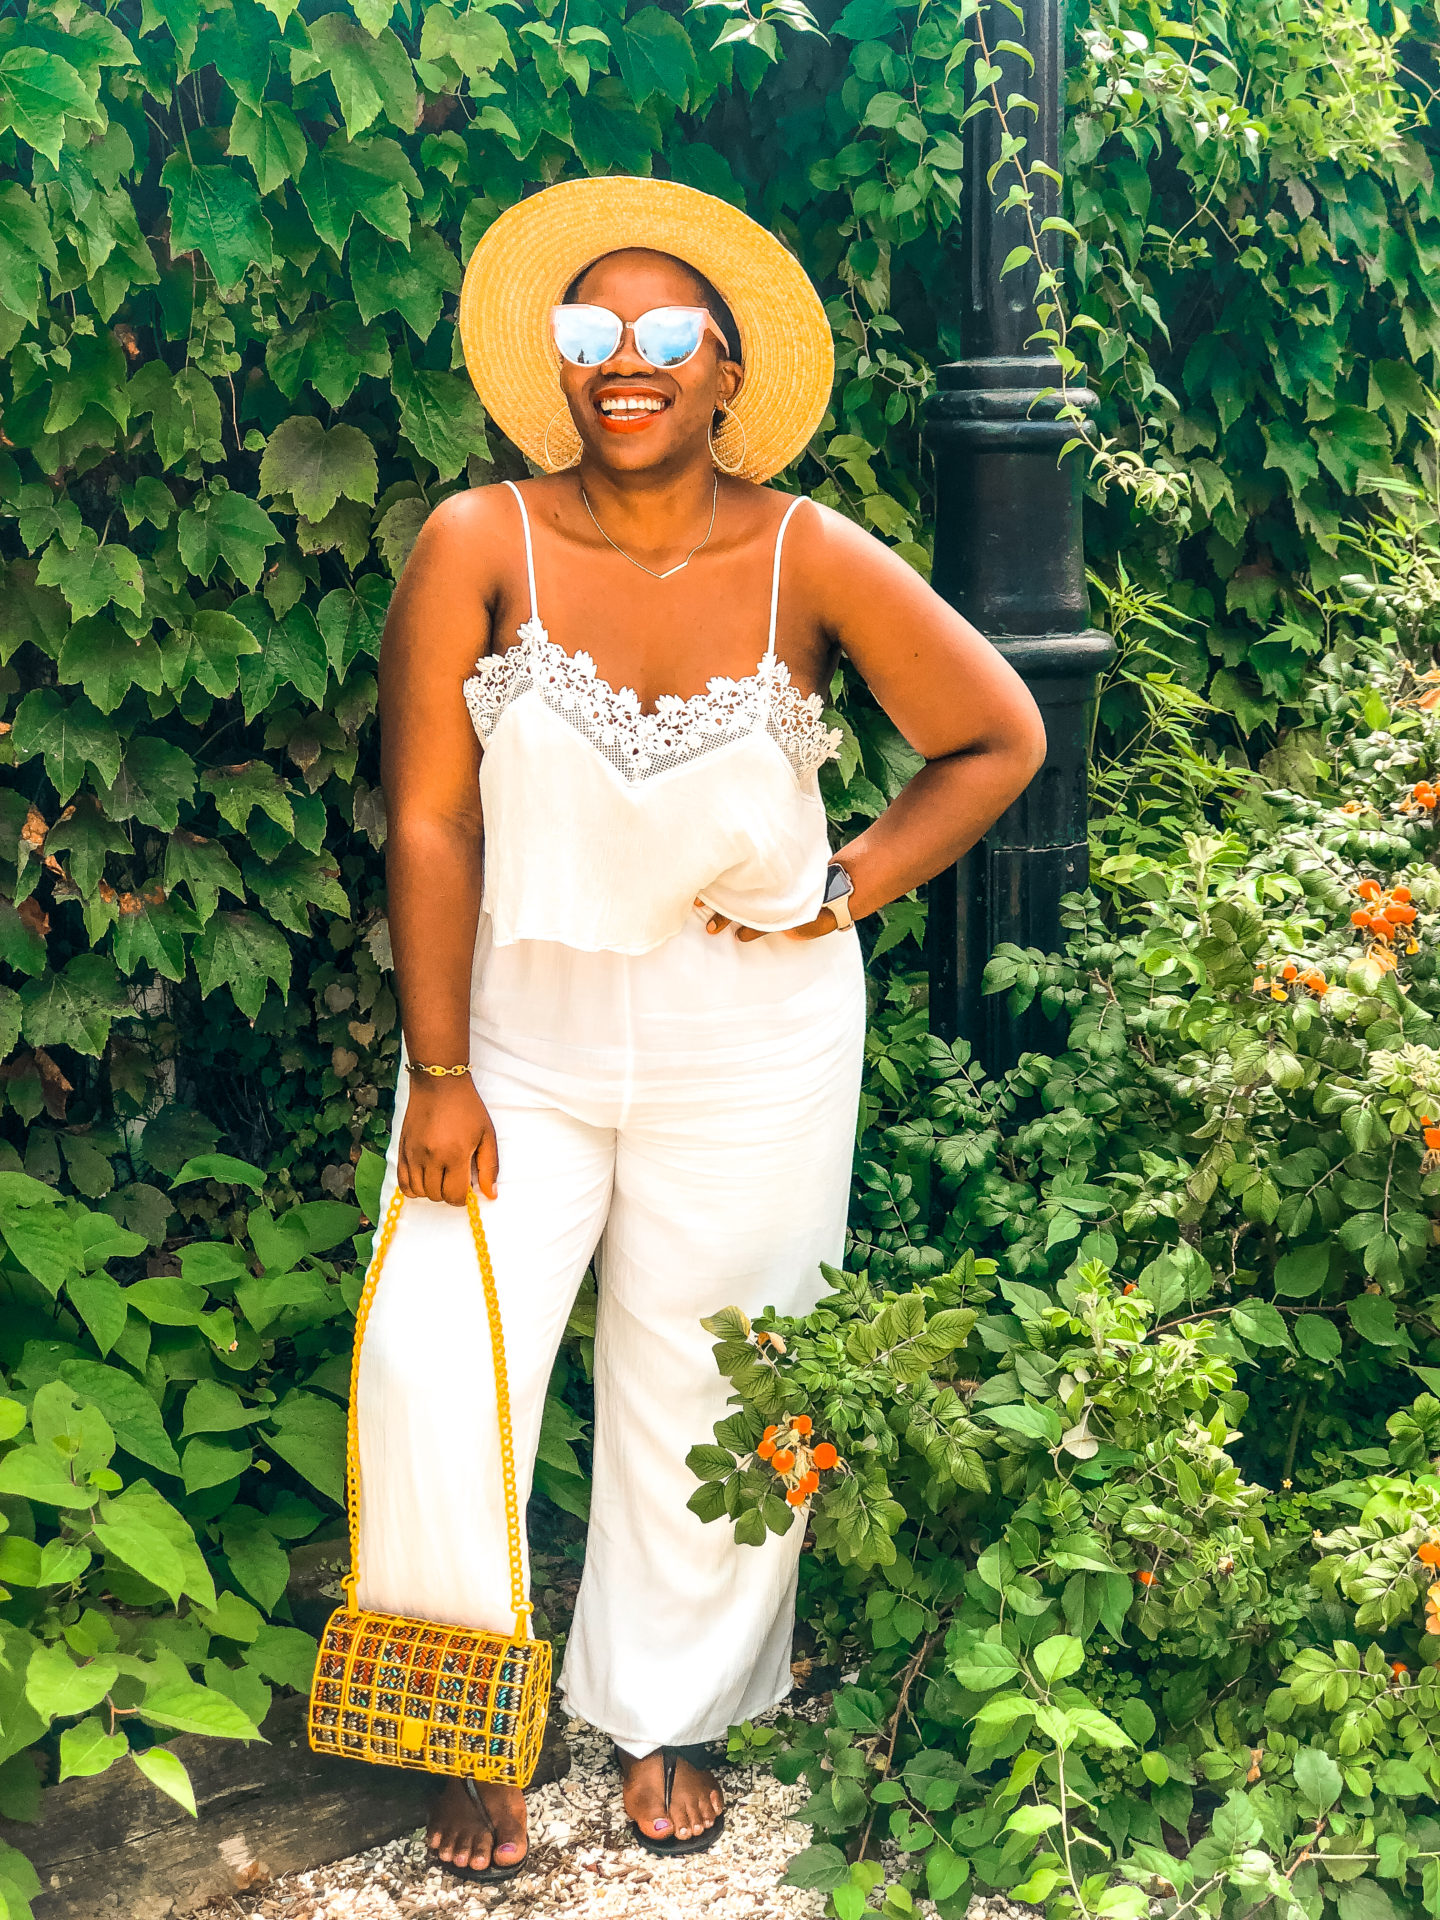 African, African Blogger, African Woman, Boston Blogger, Africancocktail, African cocktail, Charlotte Russe, New Port, New England, New England Blogger, Marthas Vineyard, Charlotte Russe Jumpsuit